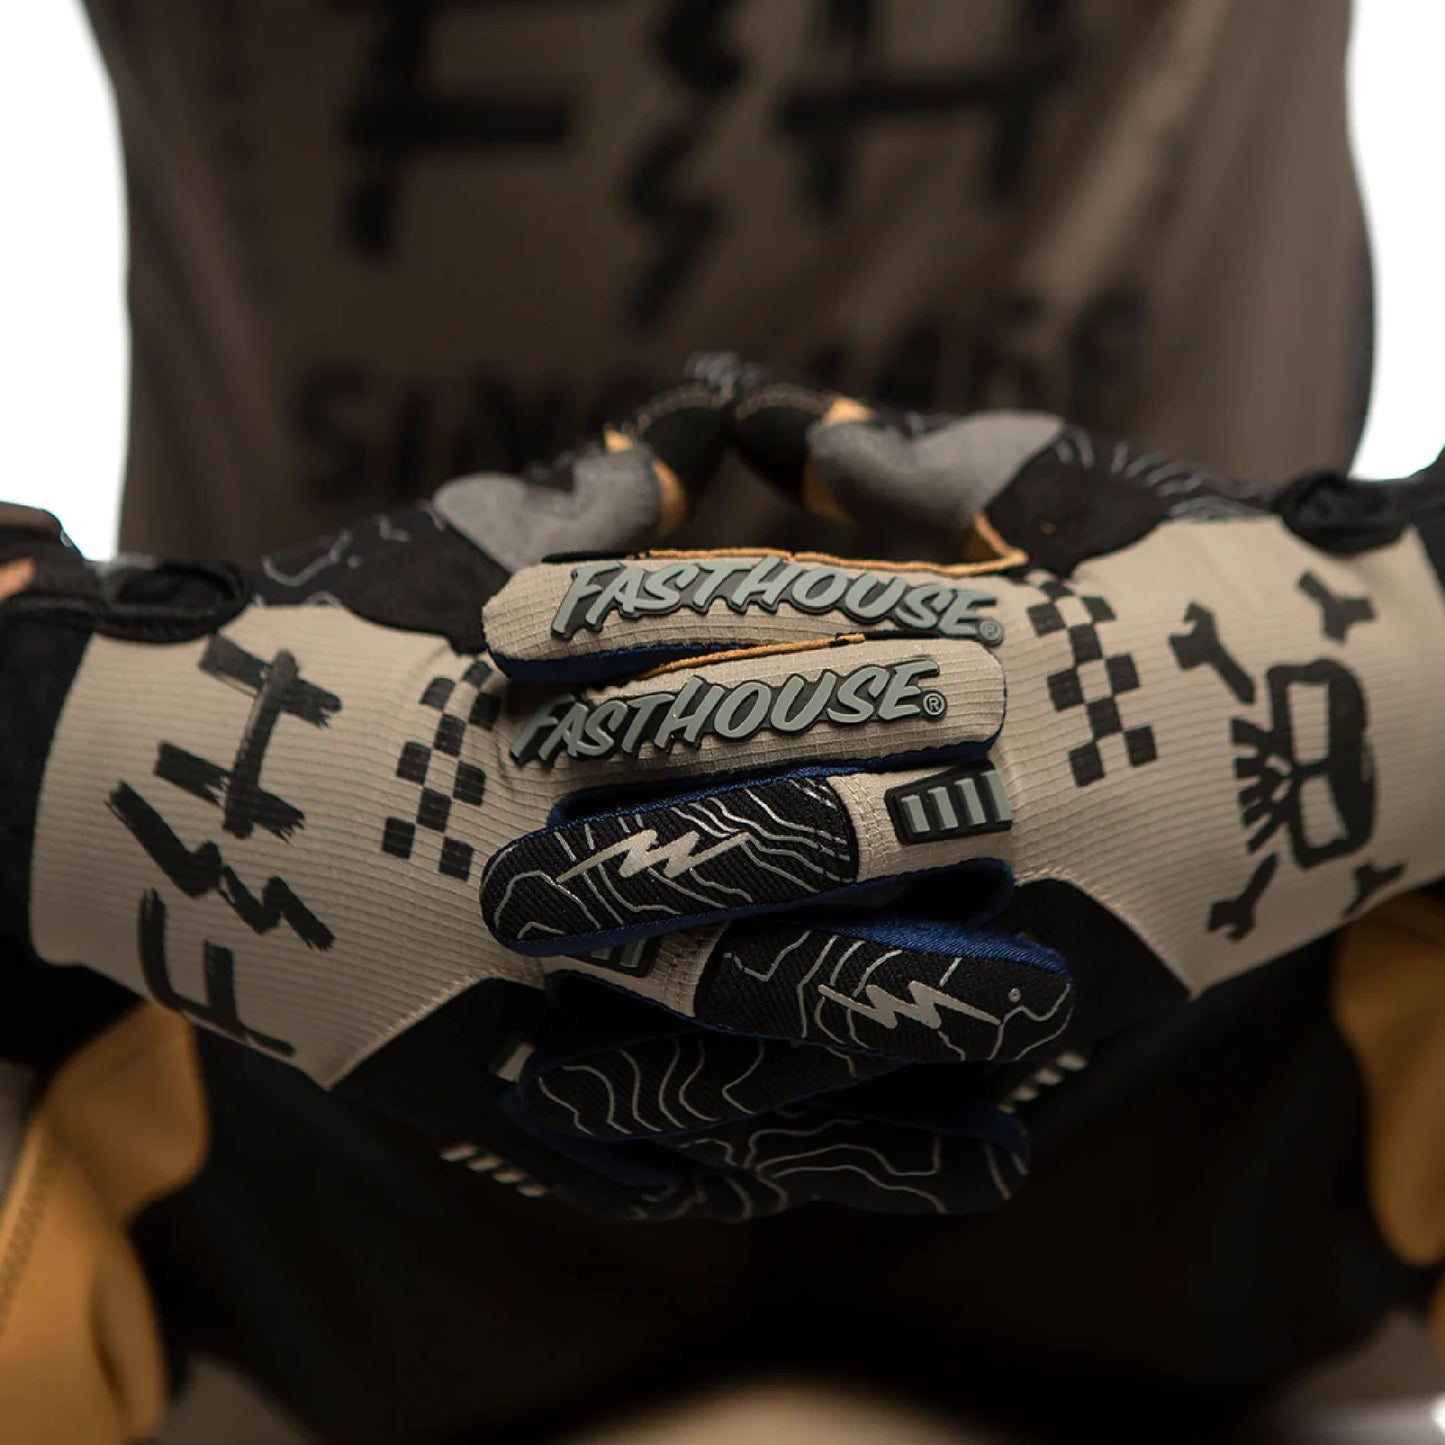 Fasthouse Off-Road Glove Moss Bike Gloves